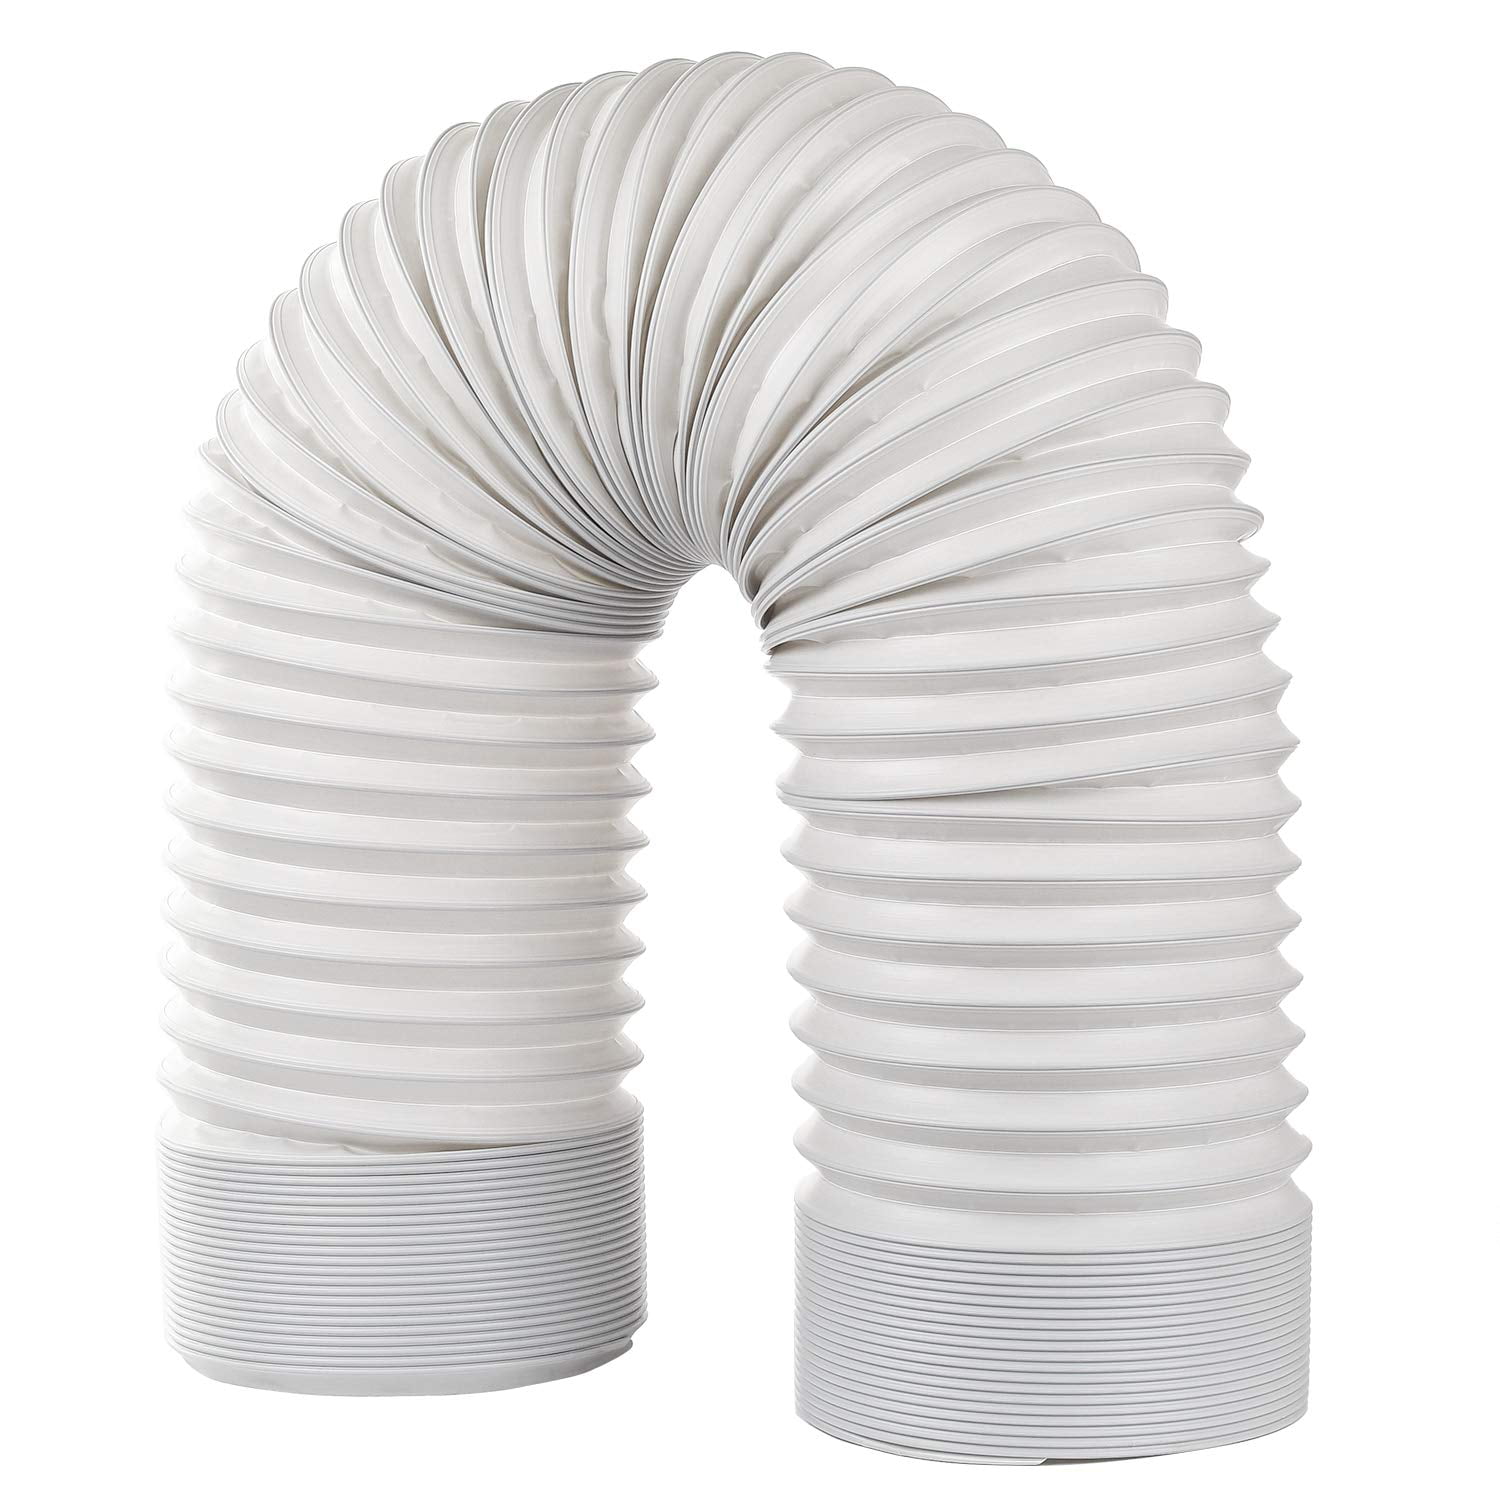 Doctor of Philosophy image Pelmel Coolmade Air Conditioner Exhaust Hose, Portable Exhaust Vent with 5.9"  Diameter - Length up to 59", Counterclockwise extendableportable AC Vent  Hose for Portable Air Conditioner - Walmart.com